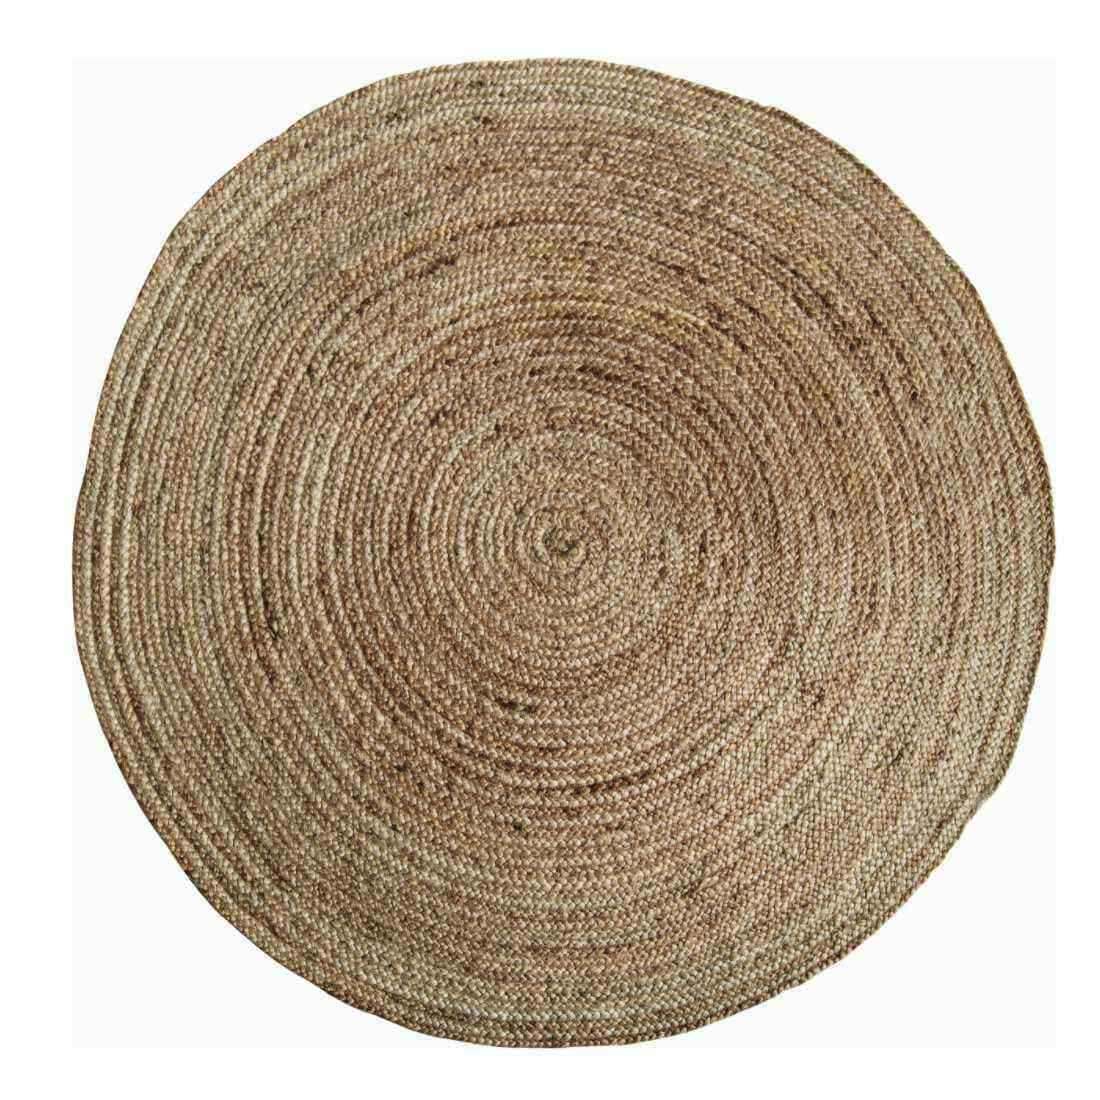 Round Woven Seagrass Rug - The Farthing